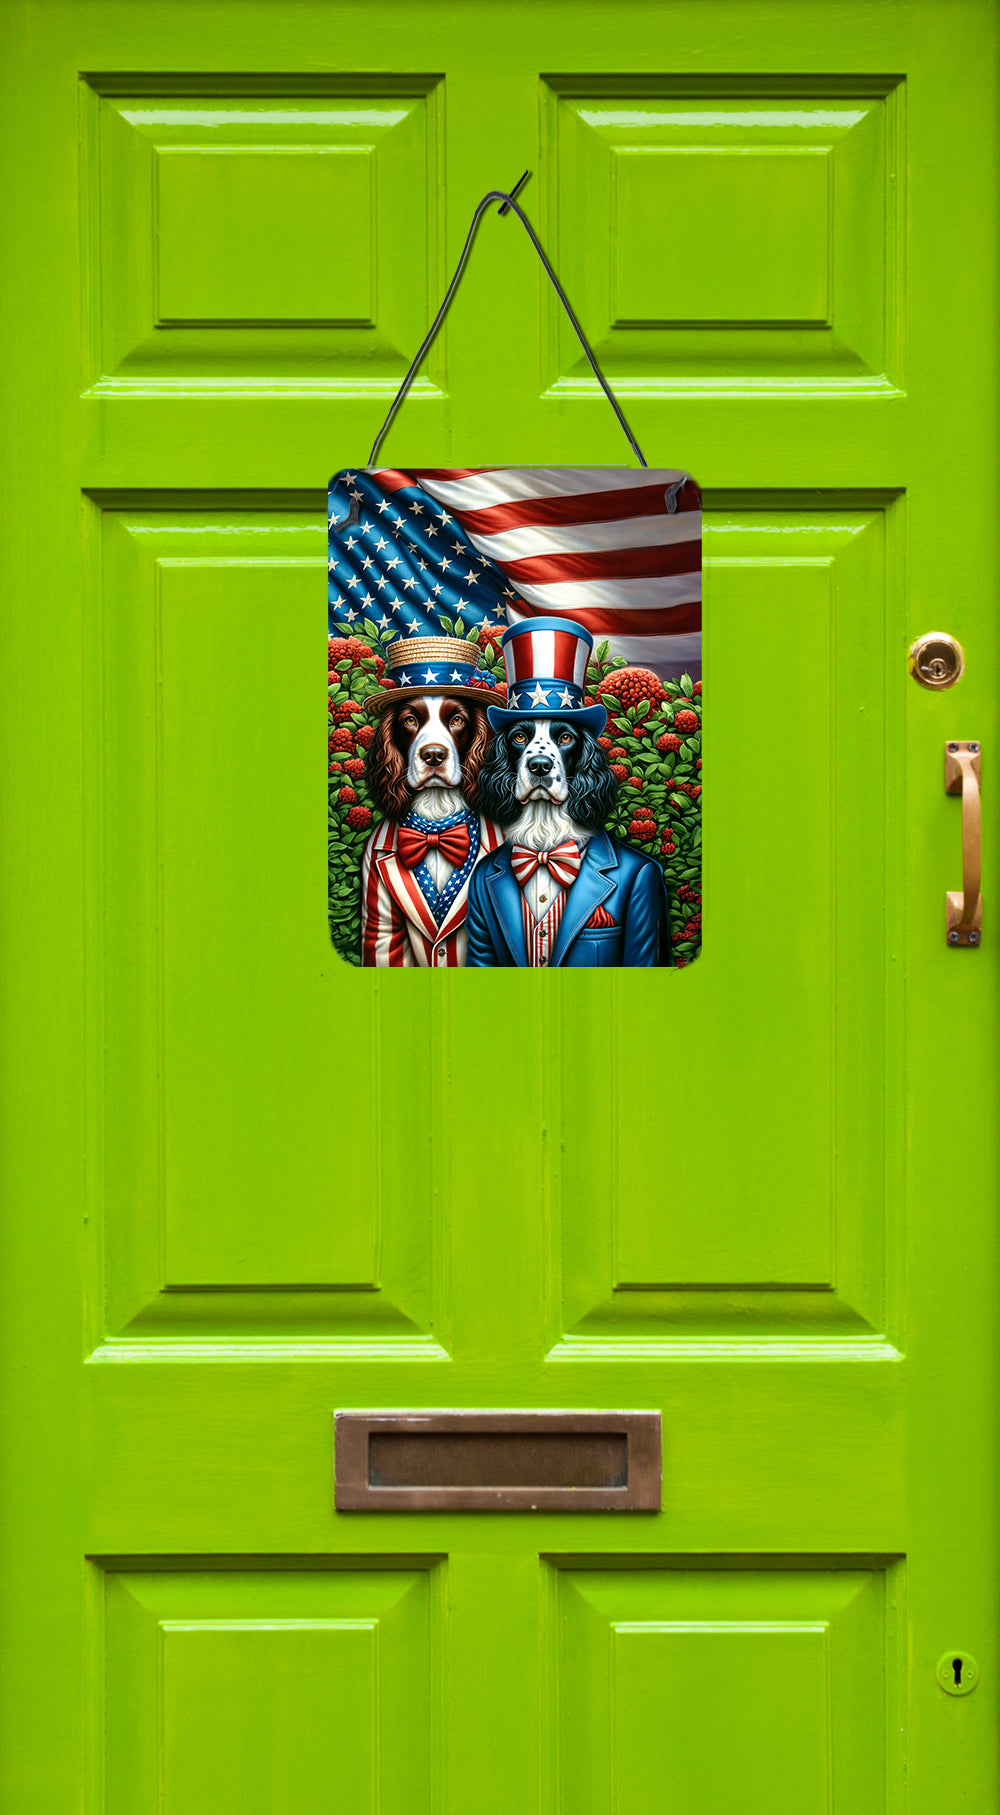 Buy this All American English Springer Spaniel Wall or Door Hanging Prints